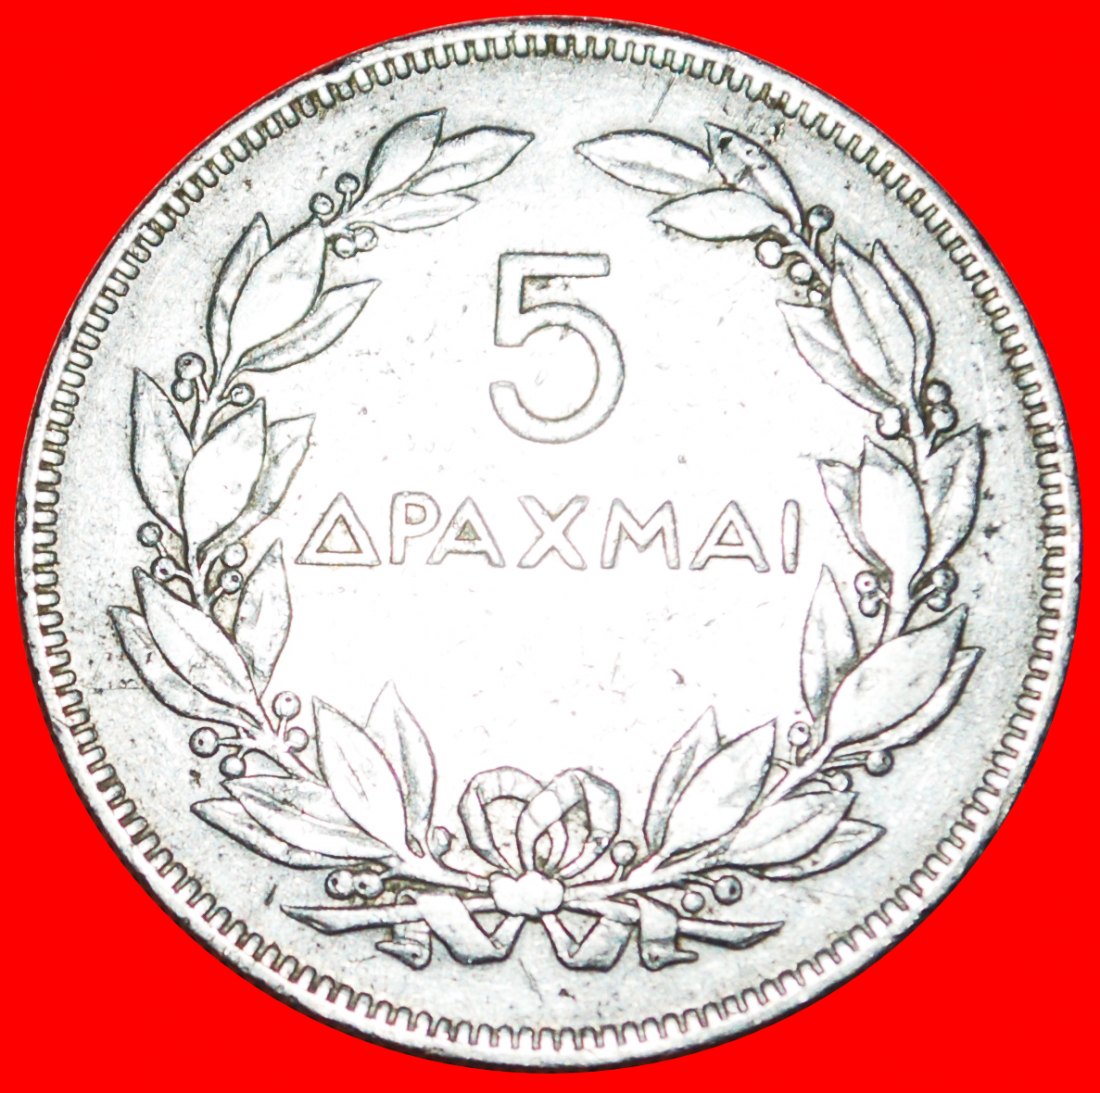  * GREAT BRITAIN: GREECE ★ 5 DRACHMAS 1930 ASTRONOMY! LOW START ★ NO RESERVE!   